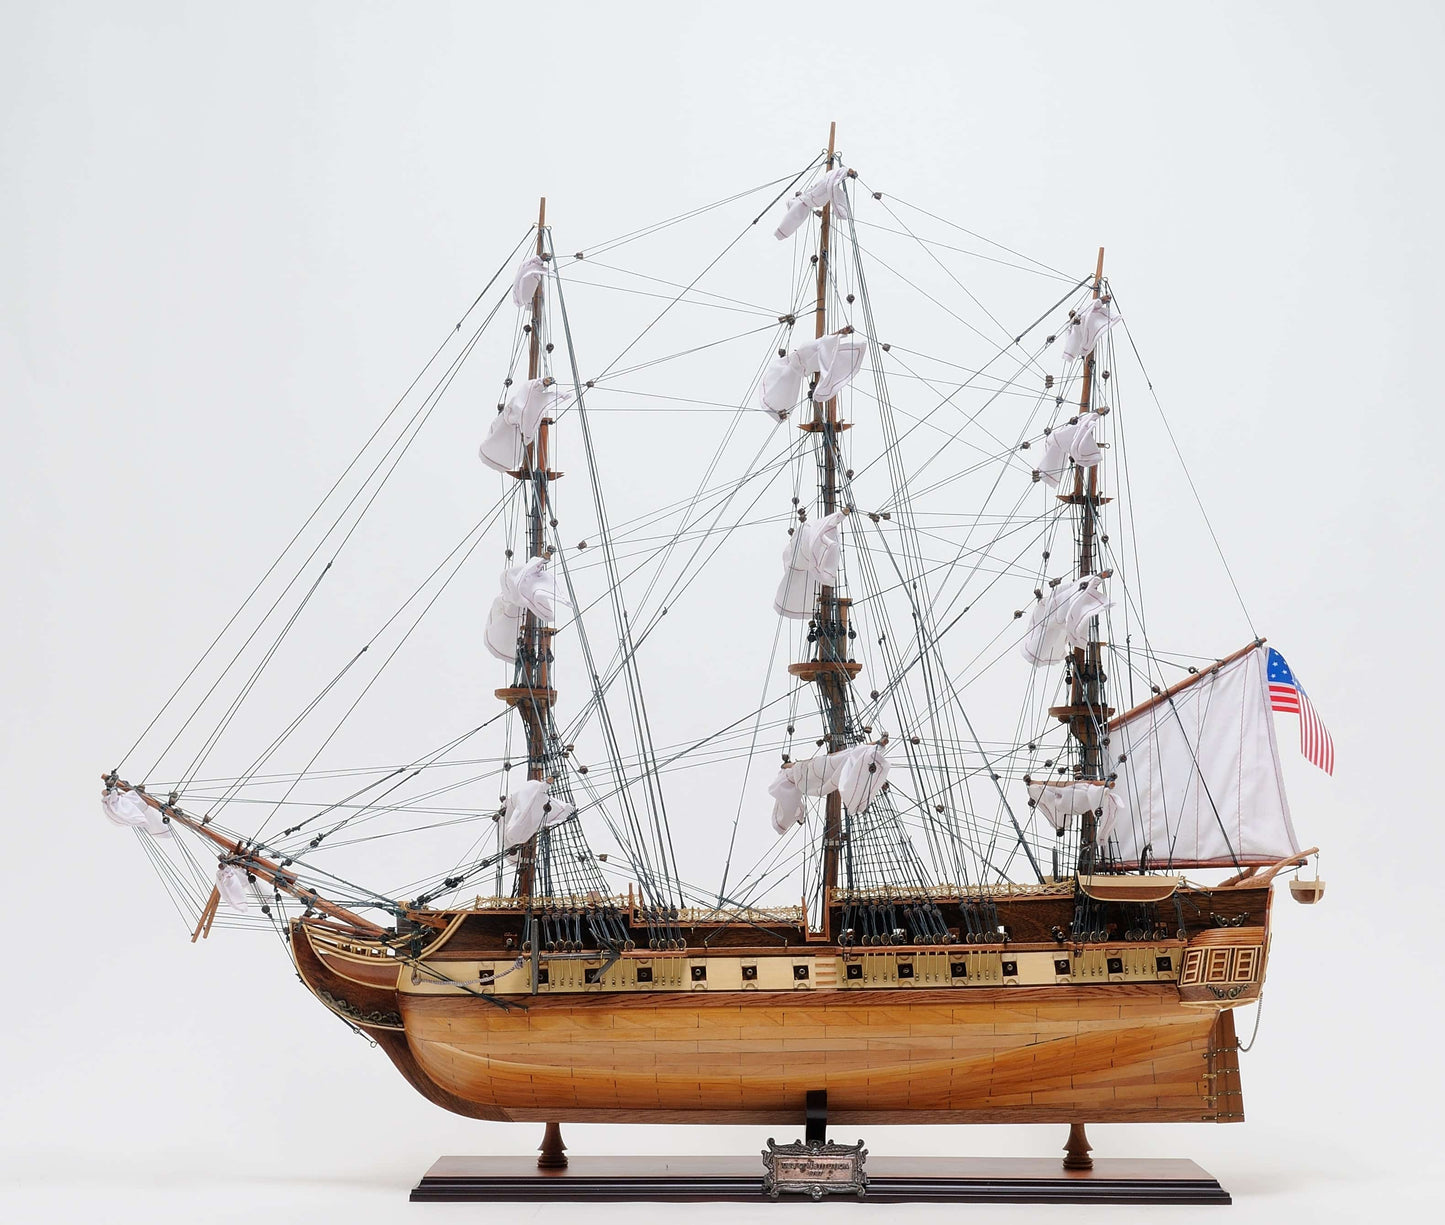 ALDO Hobbies & Creative Arts> Collectibles> Scale Model L: 35.4 W: 13.5 H: 29.5 Inches / NEW / Wood USS Constitution Medium Tall Ship Wood Model Sailboat With Tabletop Display  Front Open Case Combo Assembled